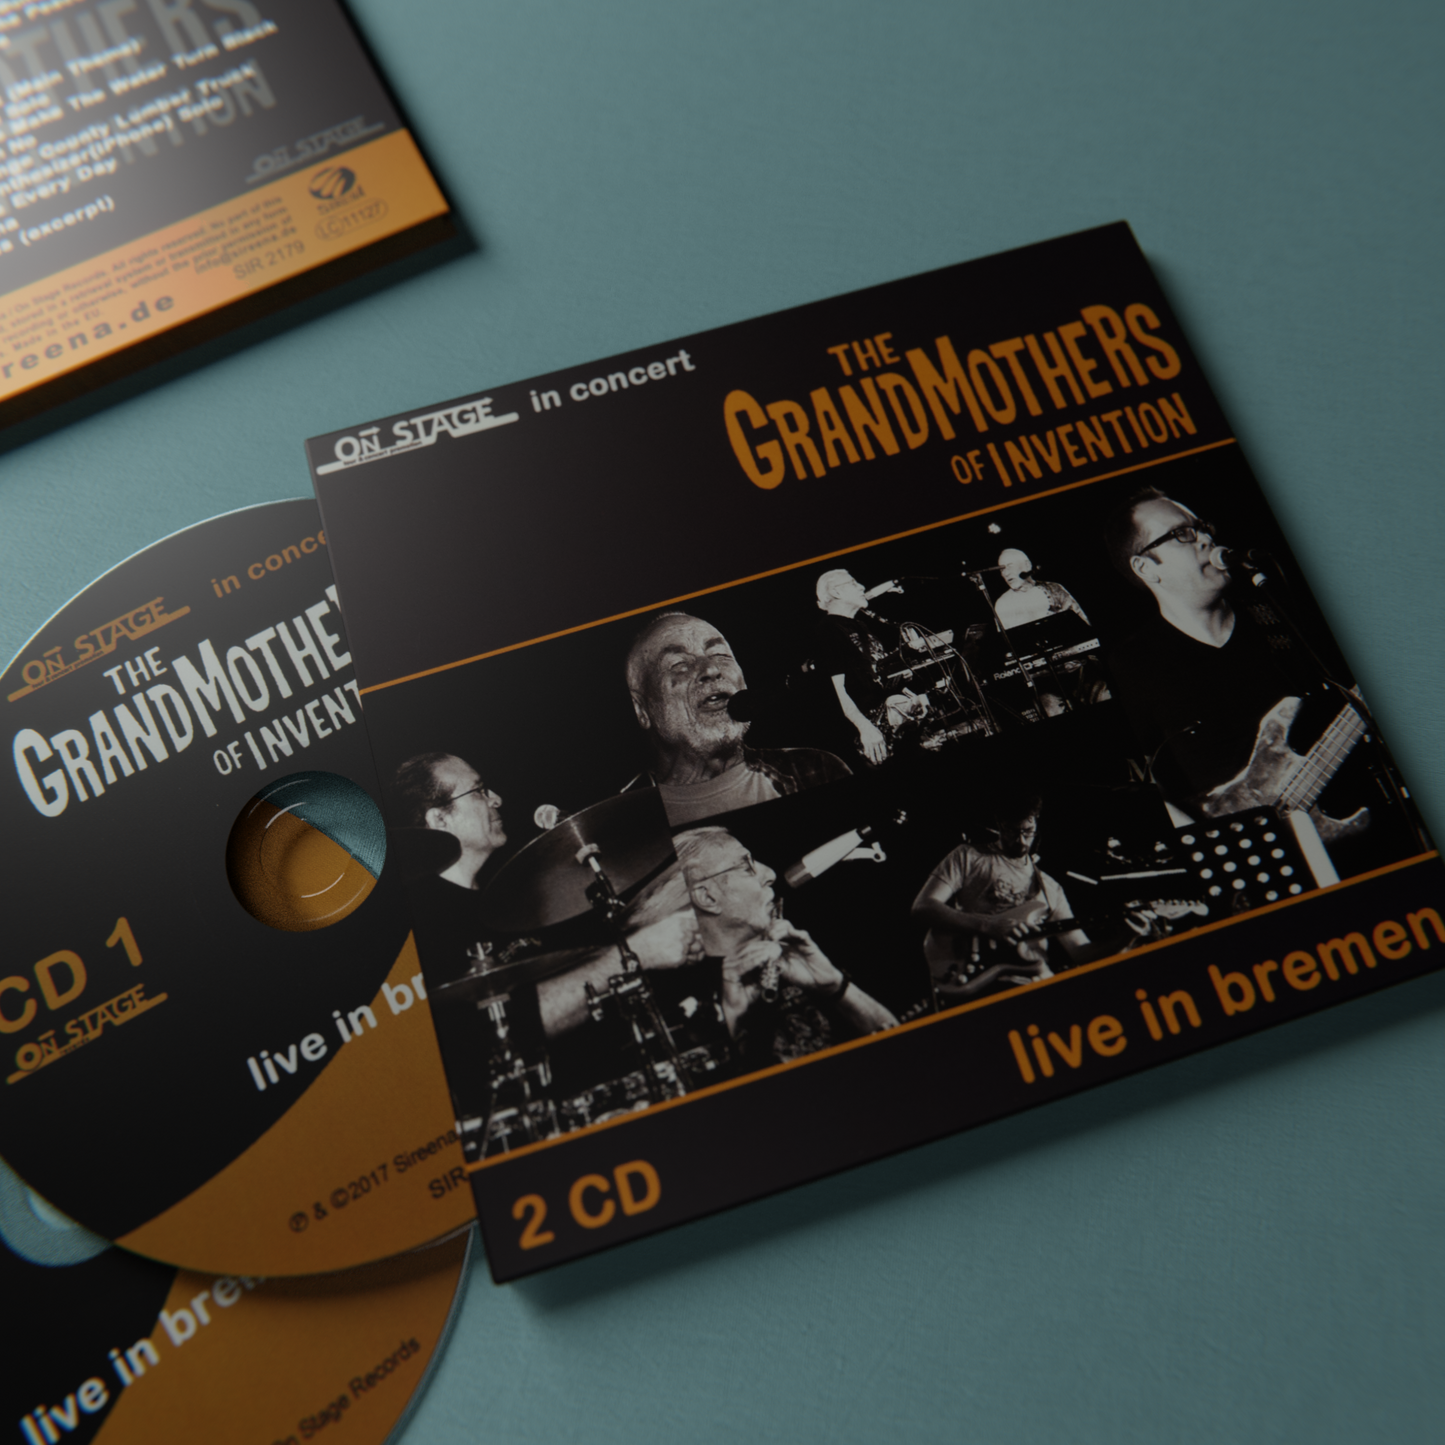 The Grandmothers Of Invention - live in Bremen, 2CD